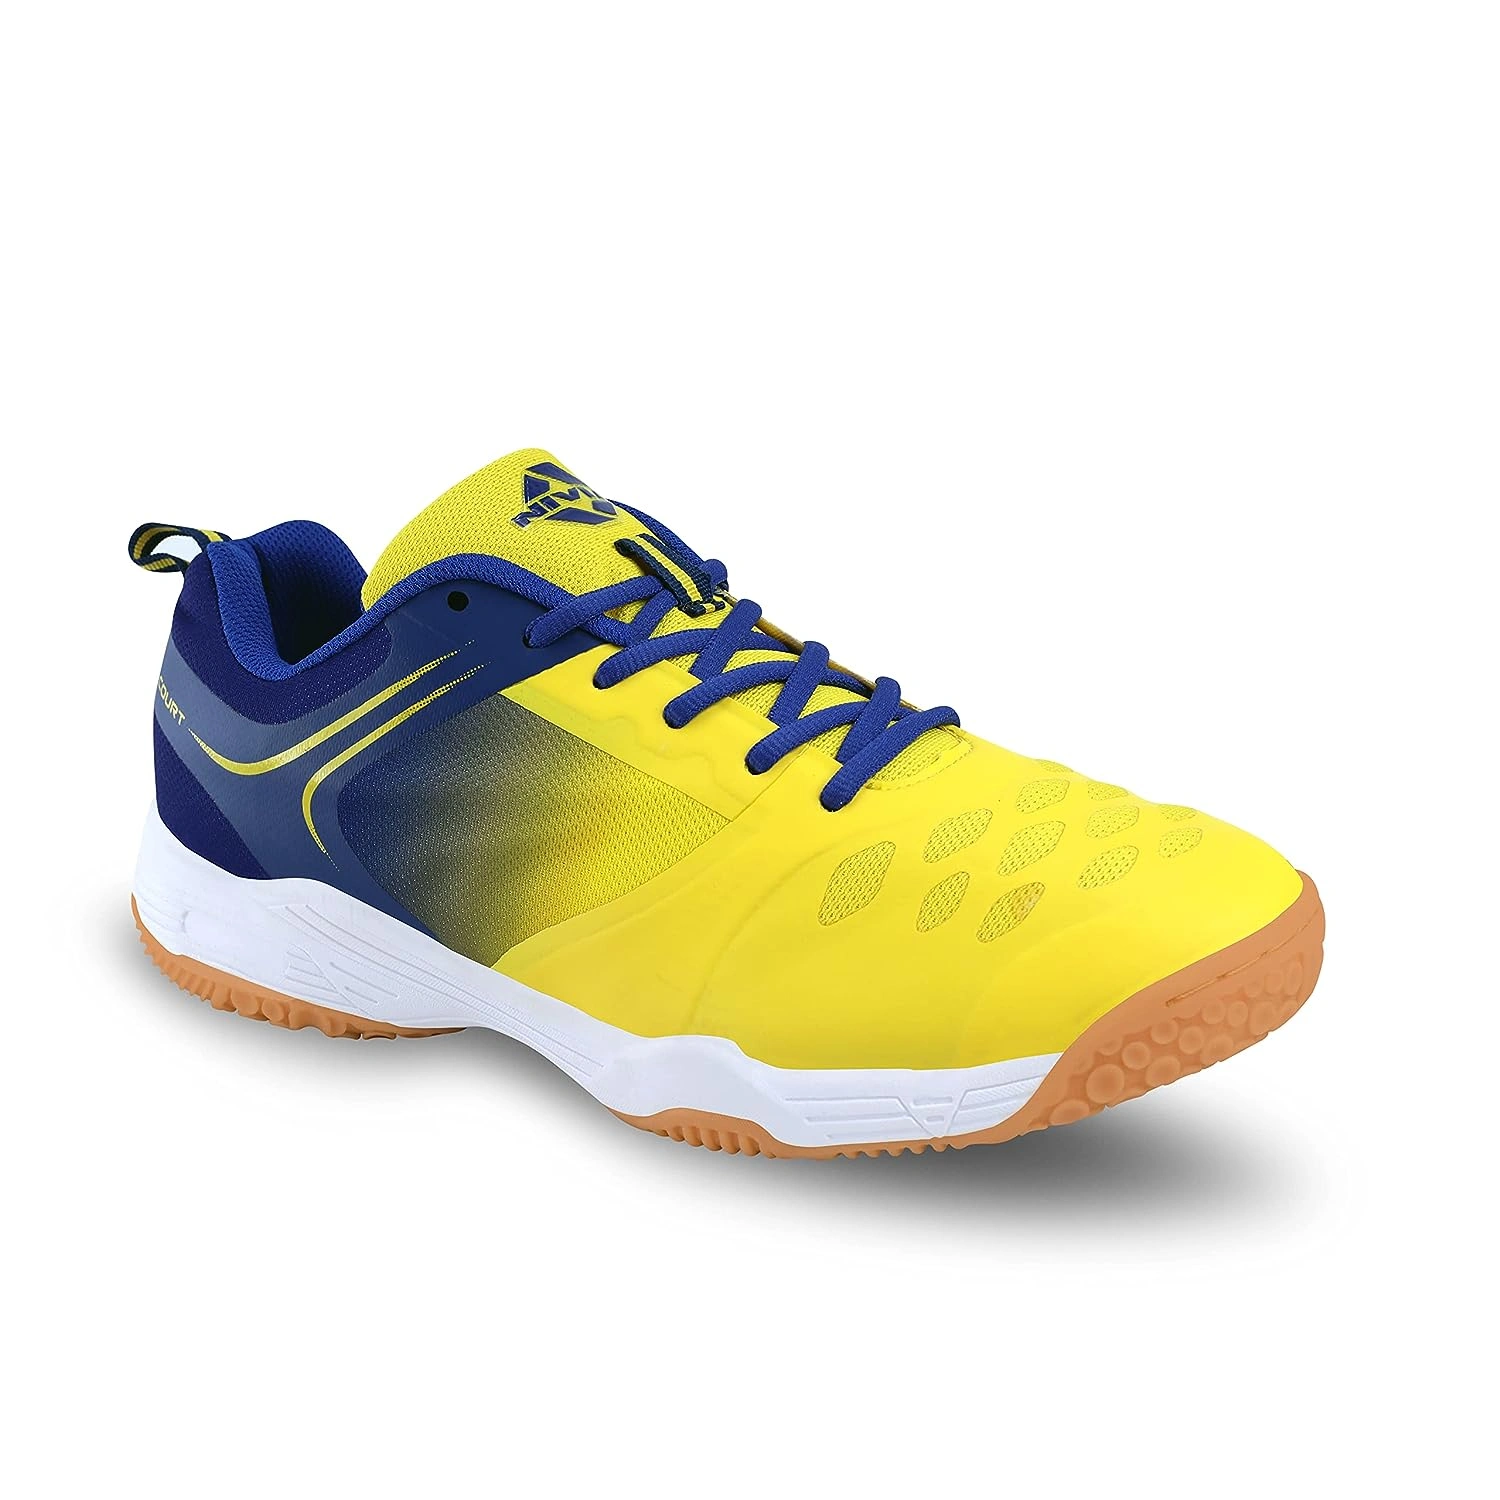 Nivia Hy-court 2.0 Badminton Shoes For Mens-YELL/ BLUE-8-1